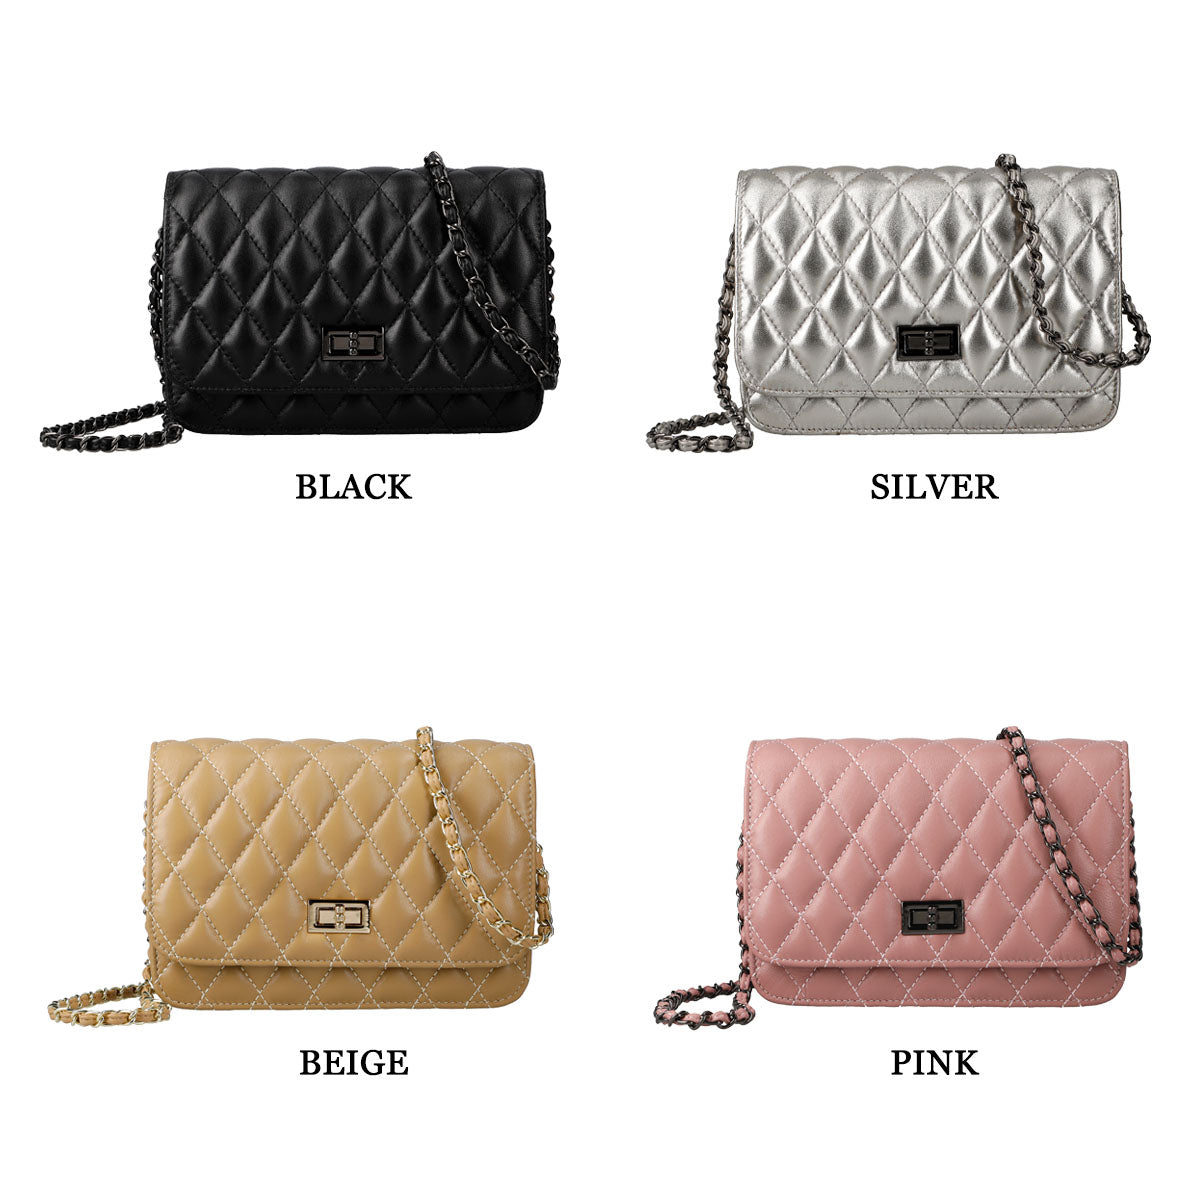 Quilted Shoulder Bag with Chain Strap